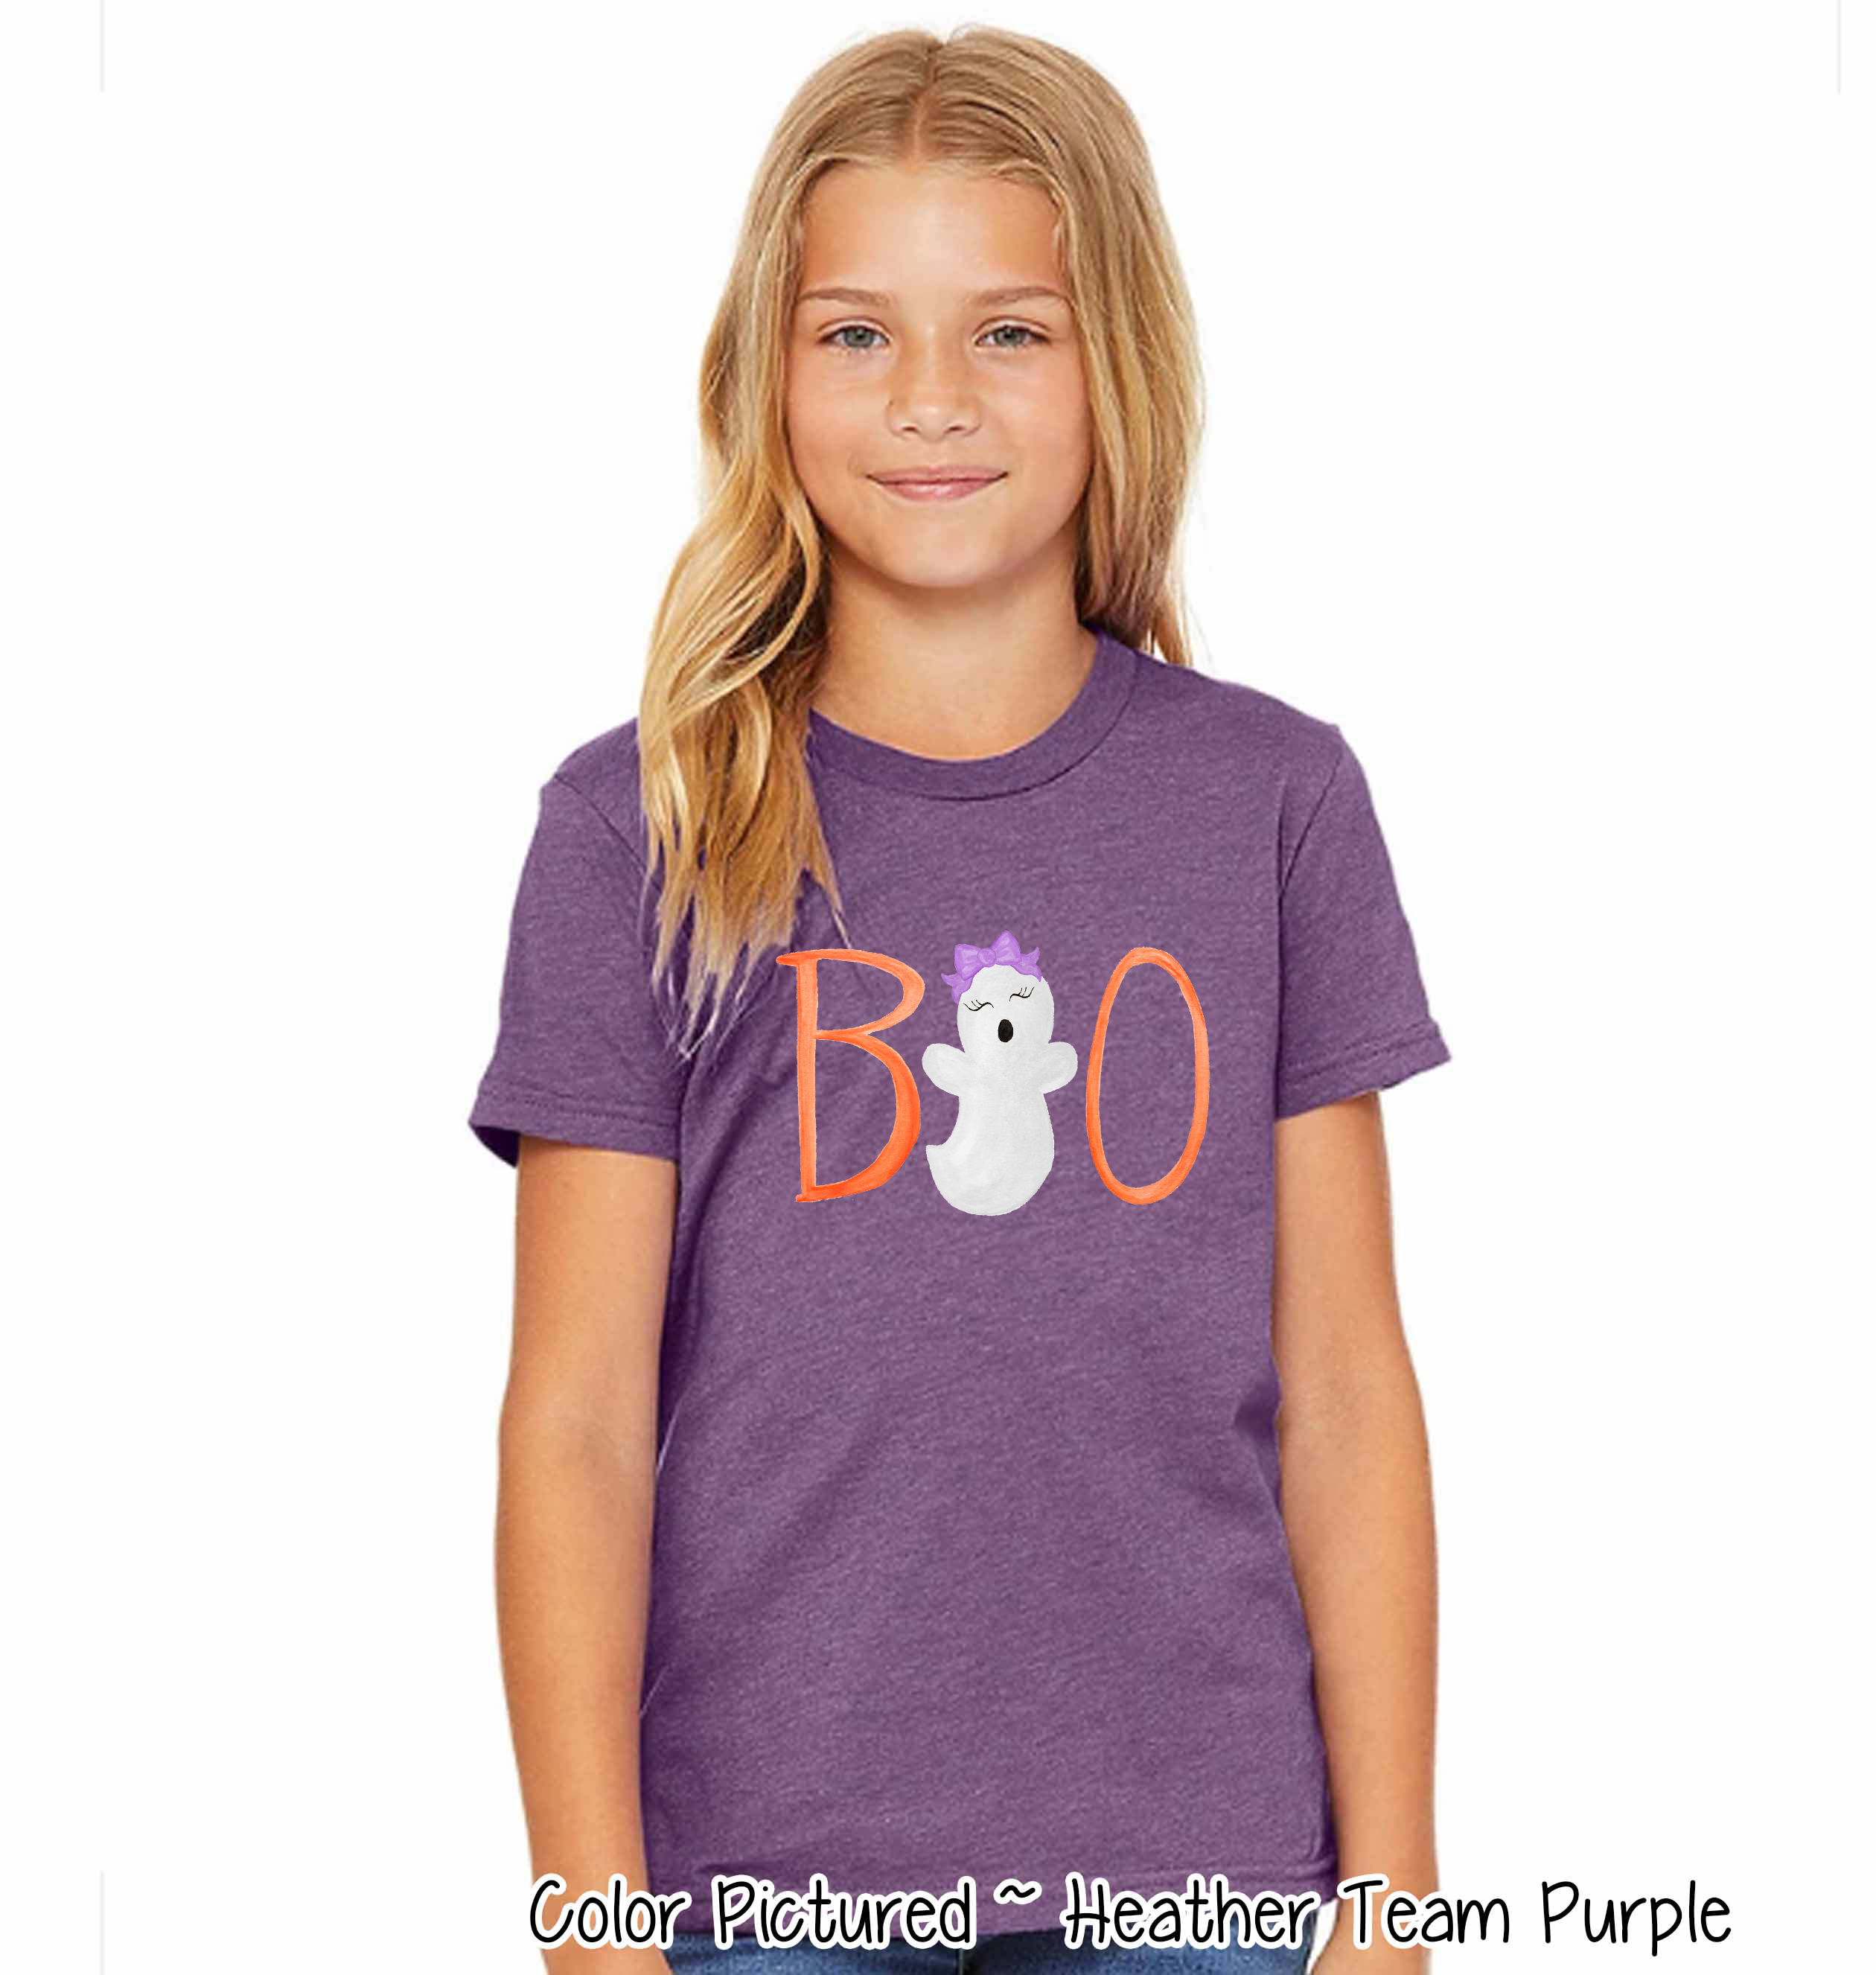 Boo Girl Youth, Toddler, Infant Halloween Tee